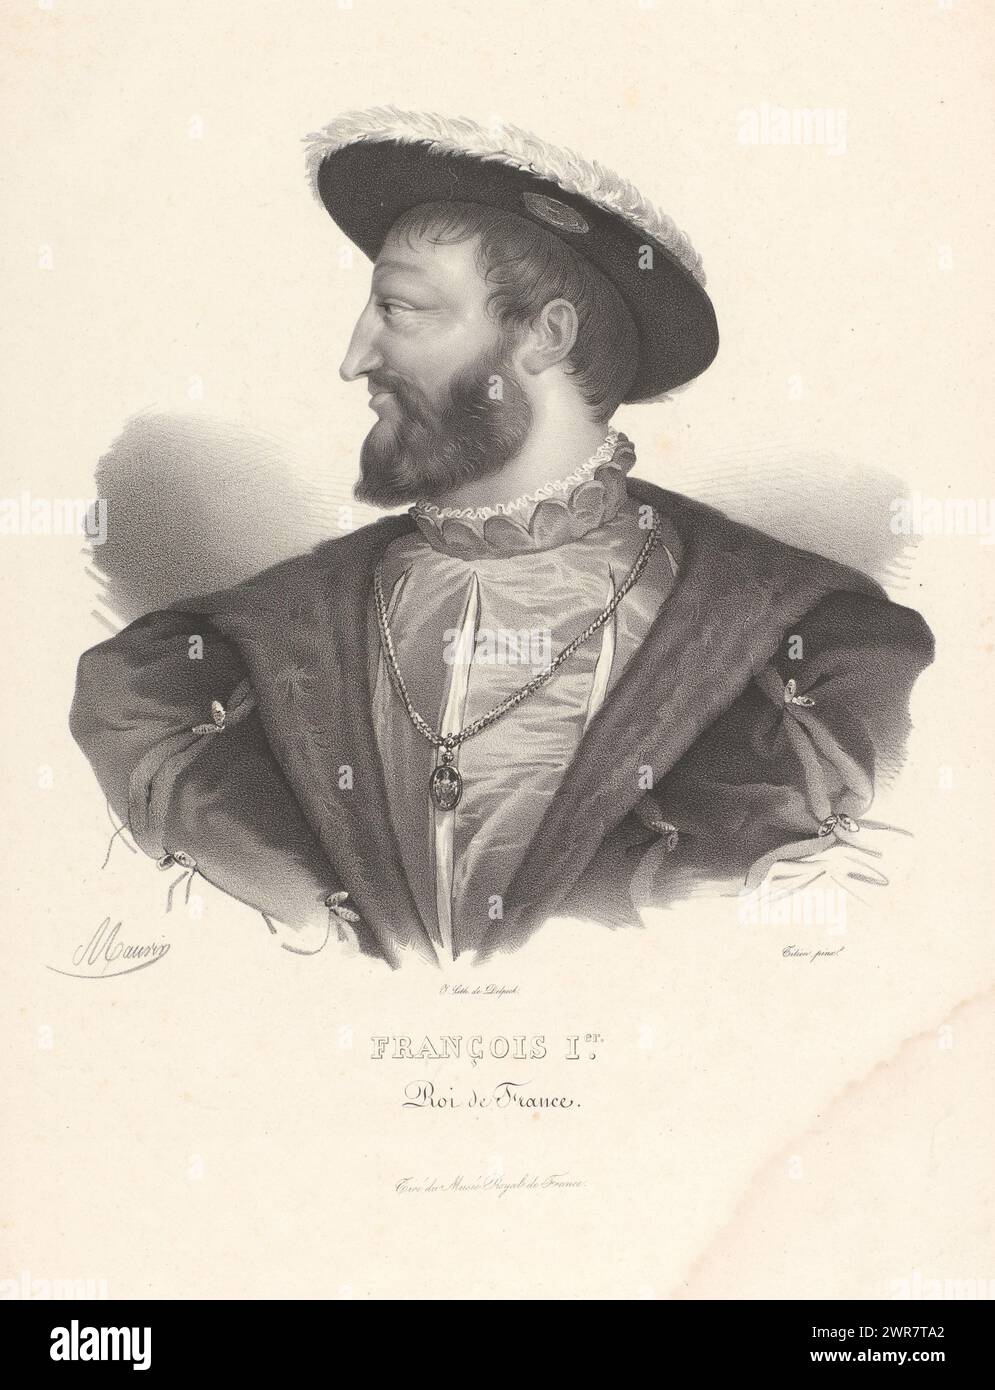 Portrait of Francis I of Valois-Angoulême, King of France, François 1er. Roi de France (title on object), print maker: Nicolas Maurin, after painting by: Titiaan, printer: veuve Delpech (Naudet), Paris, 1825 - 1842, paper, height 464 mm × width 312 mm, print Stock Photo